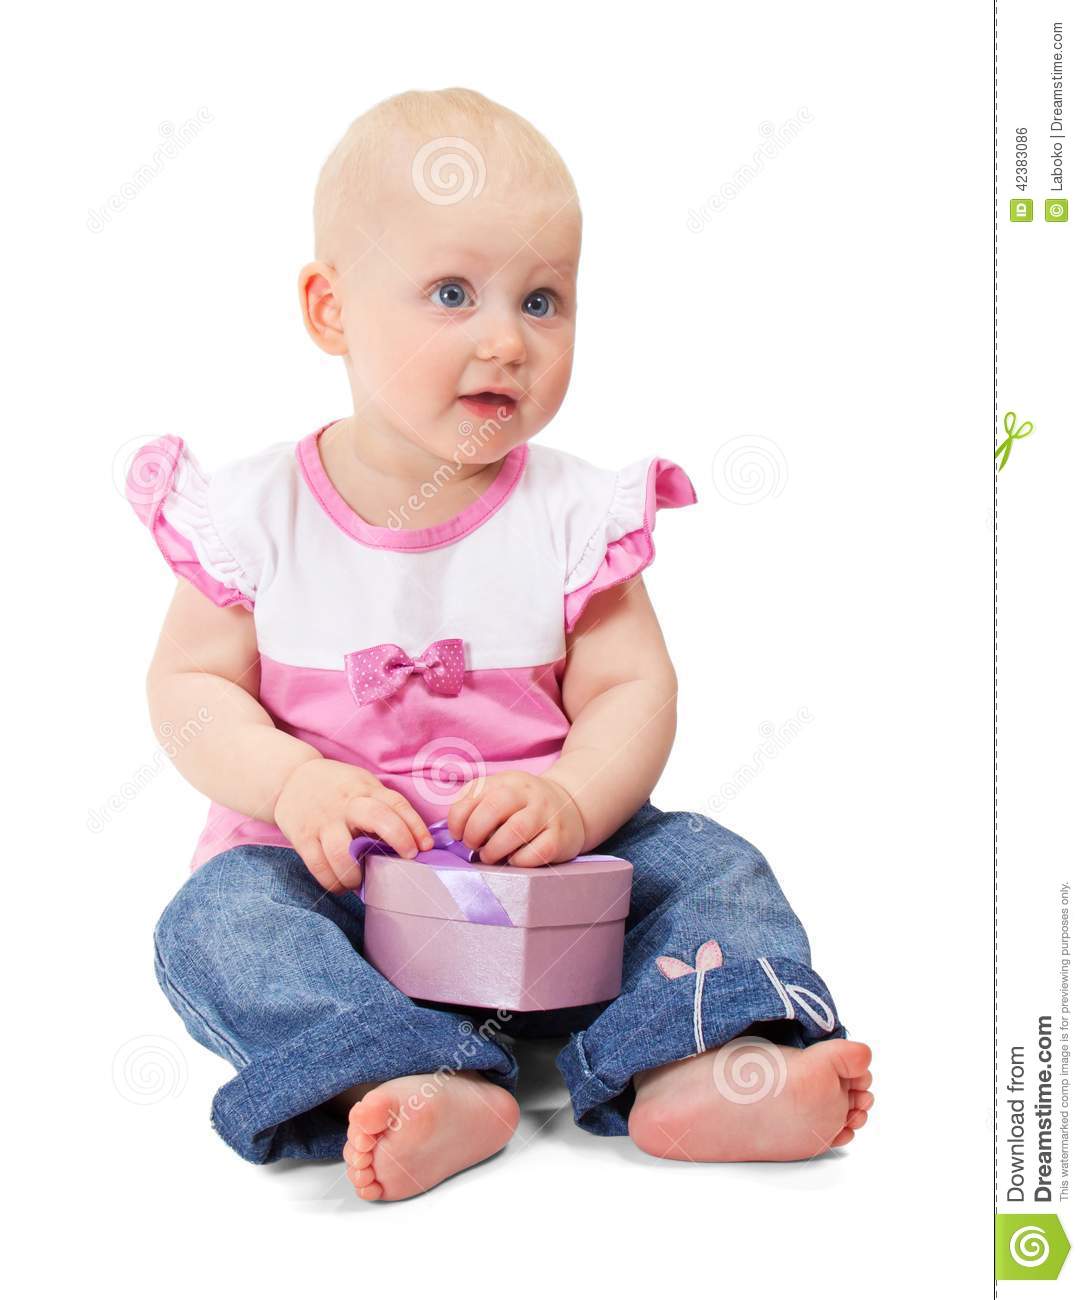 Little Girl In Jacket And Blue Jeans With Gift Box Stock Photo   Image